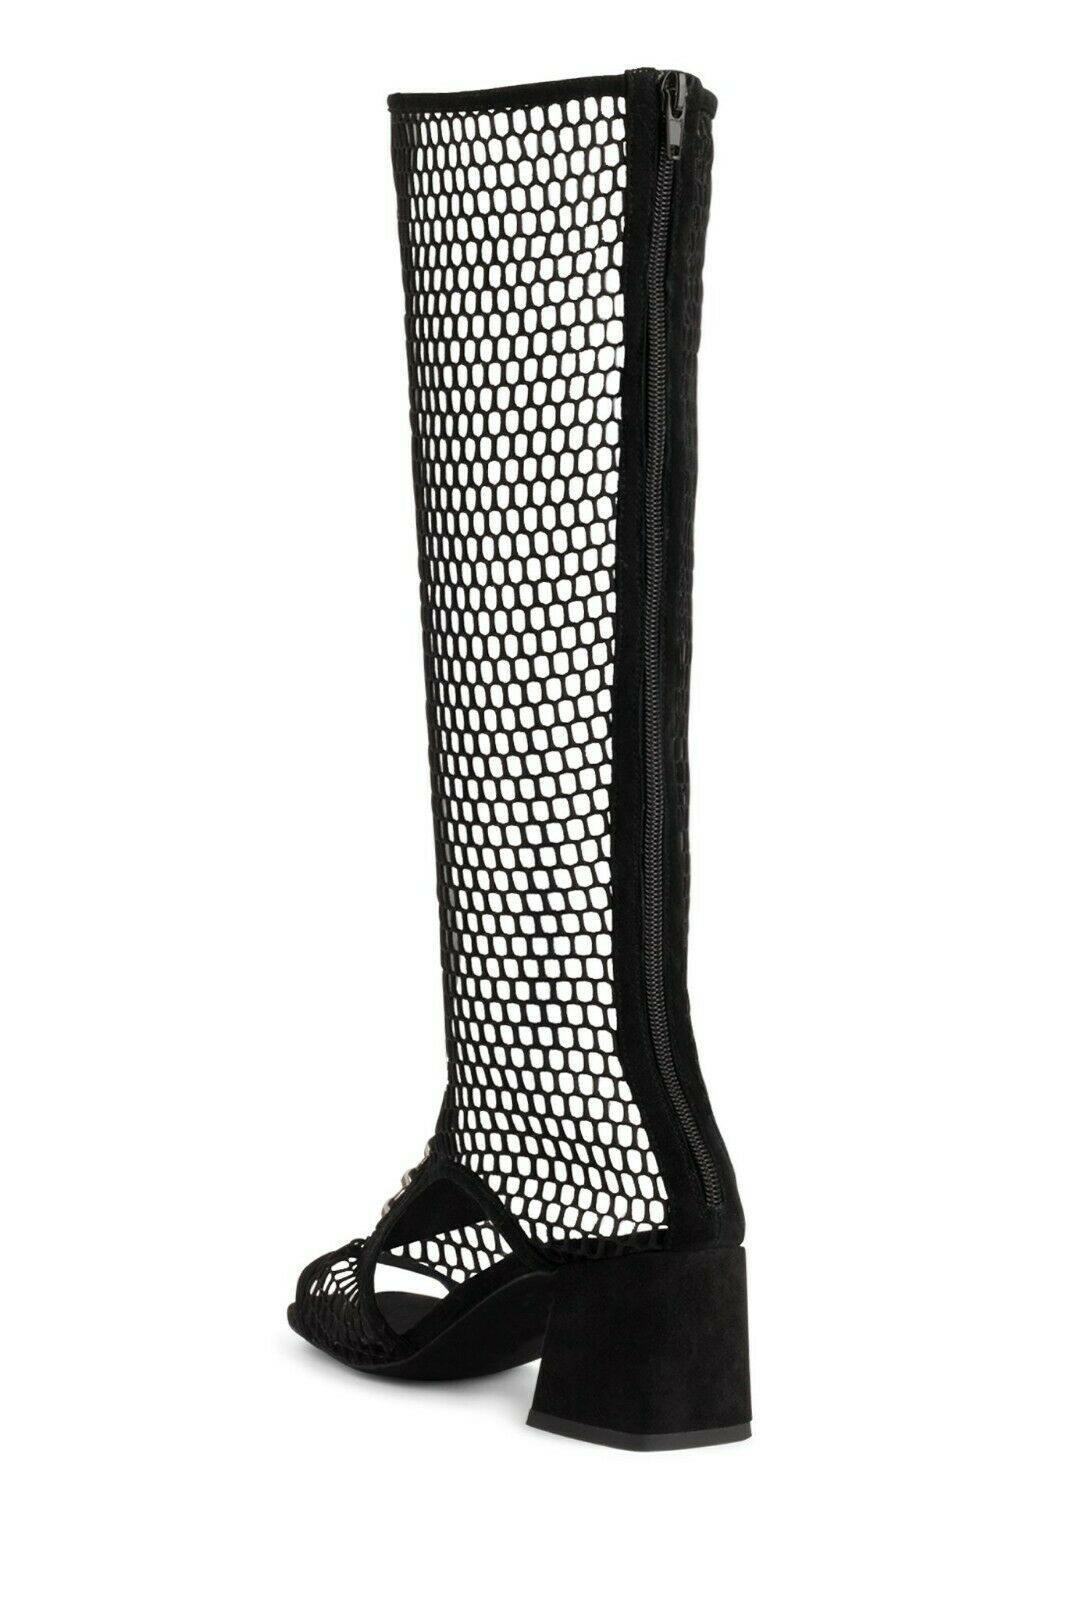 Jeffrey Campbell Savior Black Mesh Lace Up and Zip Boots Us 6 - SVNYFancy